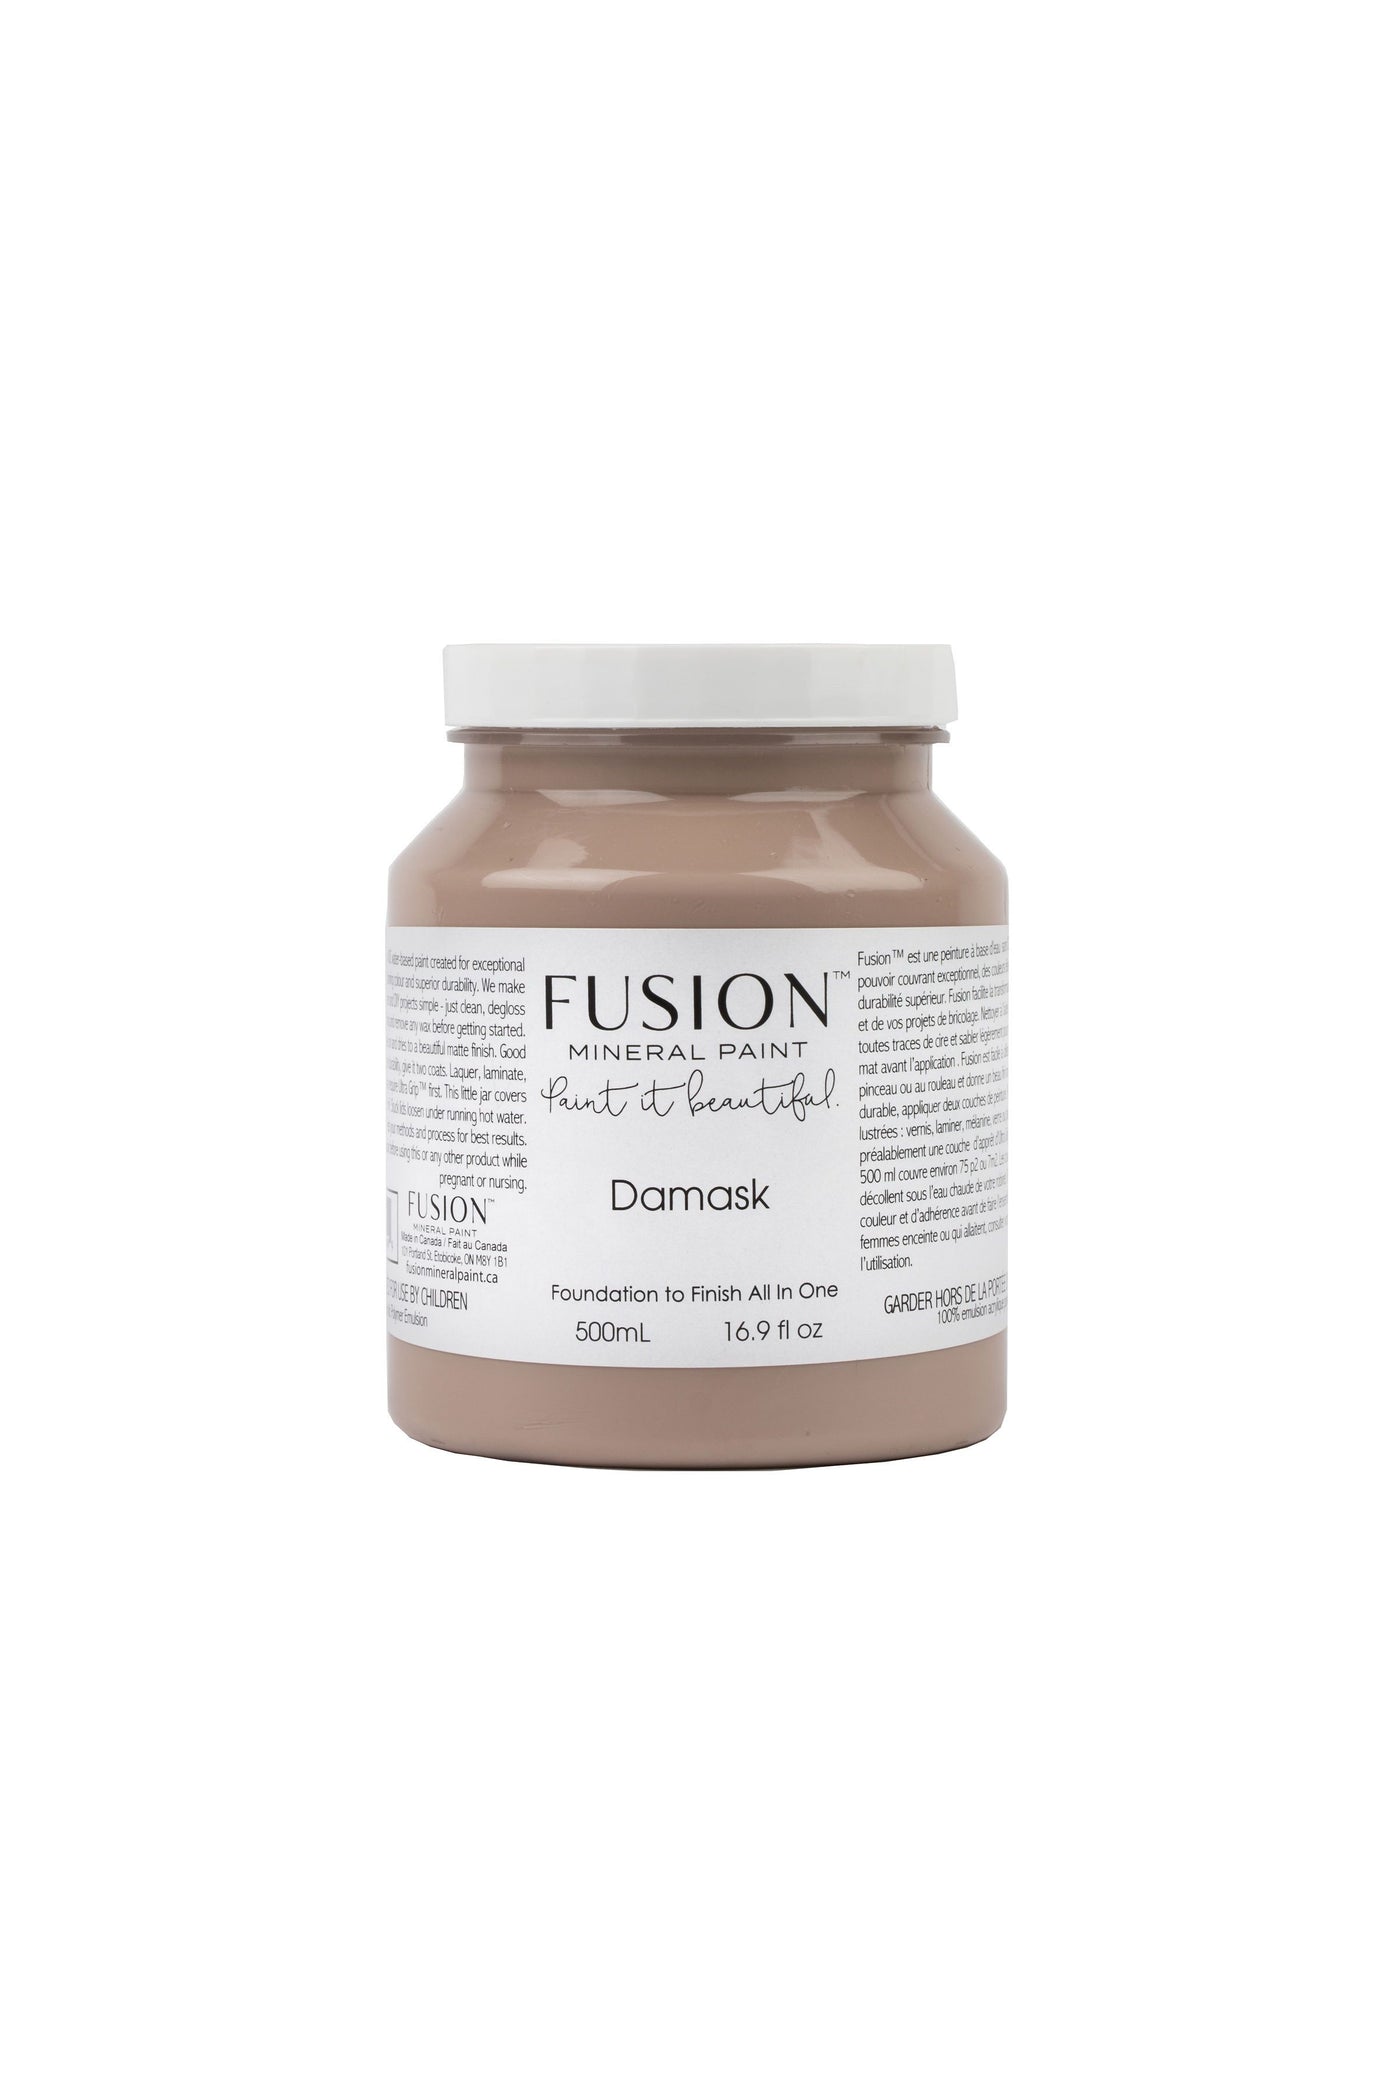 Fusion Mineral Paint - DAMASK 500ml soft warm mauve pink For the Love Creations